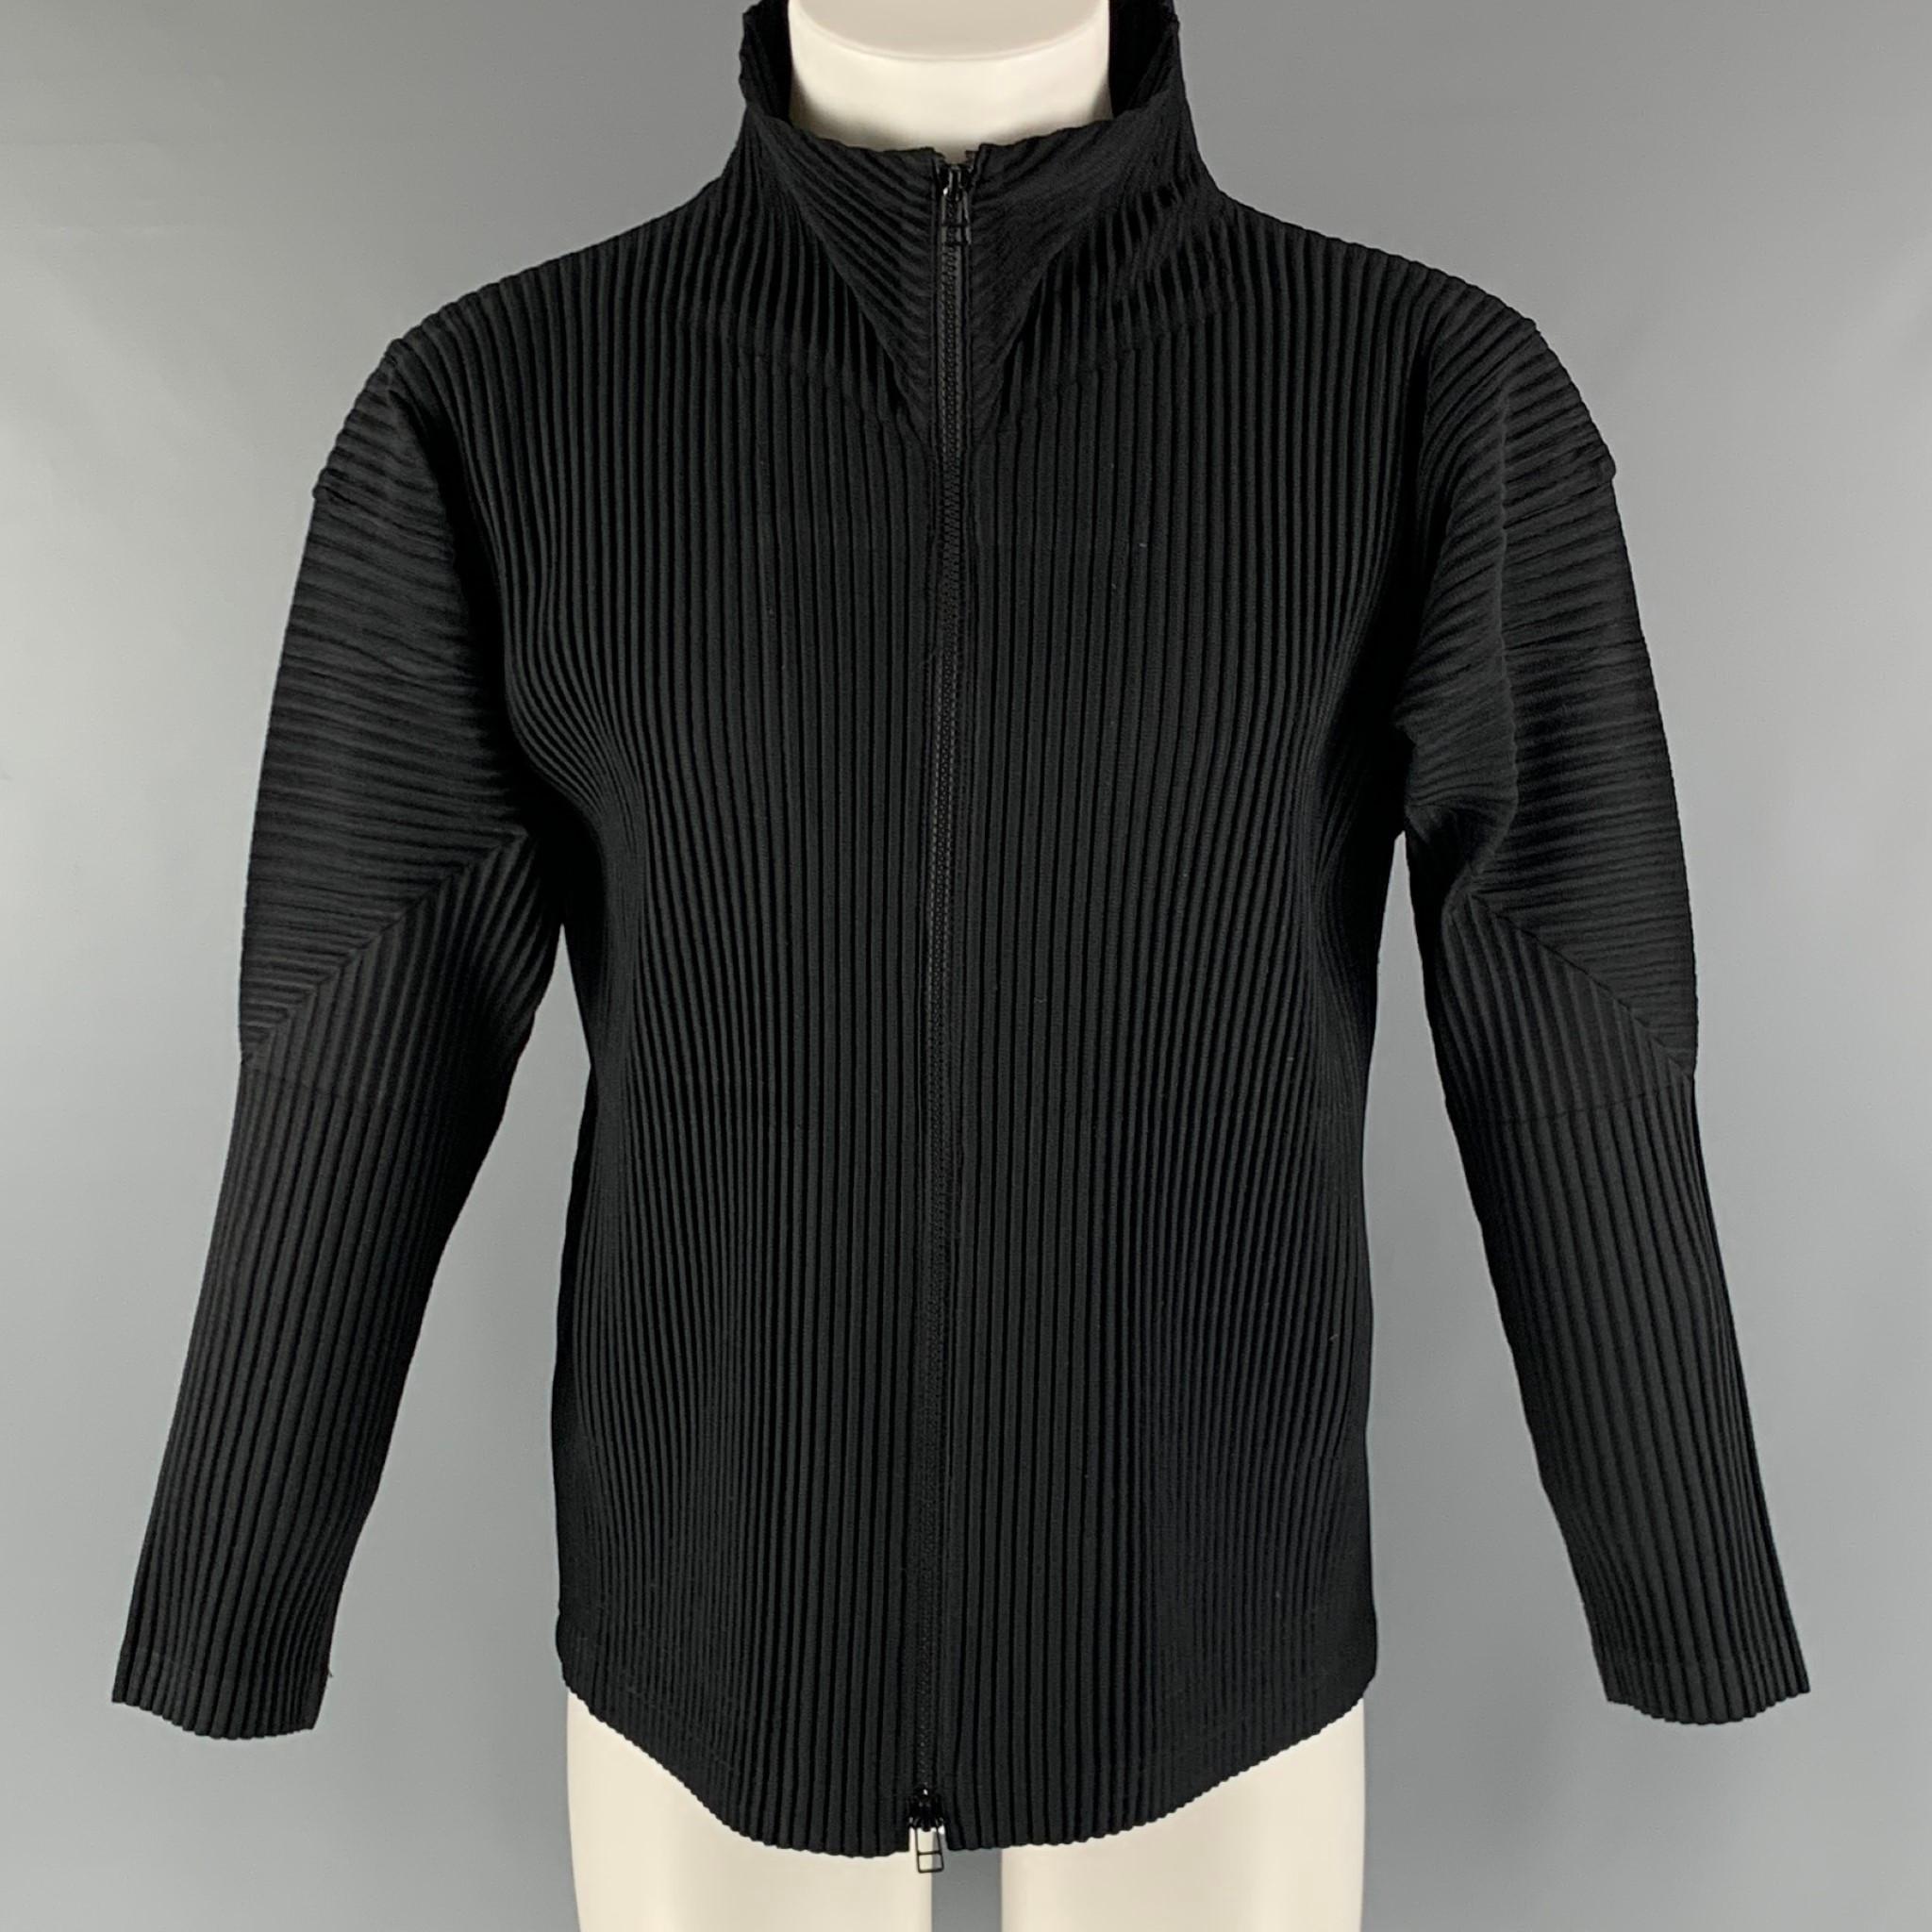 ISSEY MIYAKE ' HOMME PLISSE' jacket comes in a black polyester with a pleated design featuring frontal pockets, and a zip up closure. Made in Japan.

Excellent Pre-Owned Condition.
Marked: JP 2

Measurements:

Shoulder: 18 in.
Bust: 45 in. 
Sleeve: